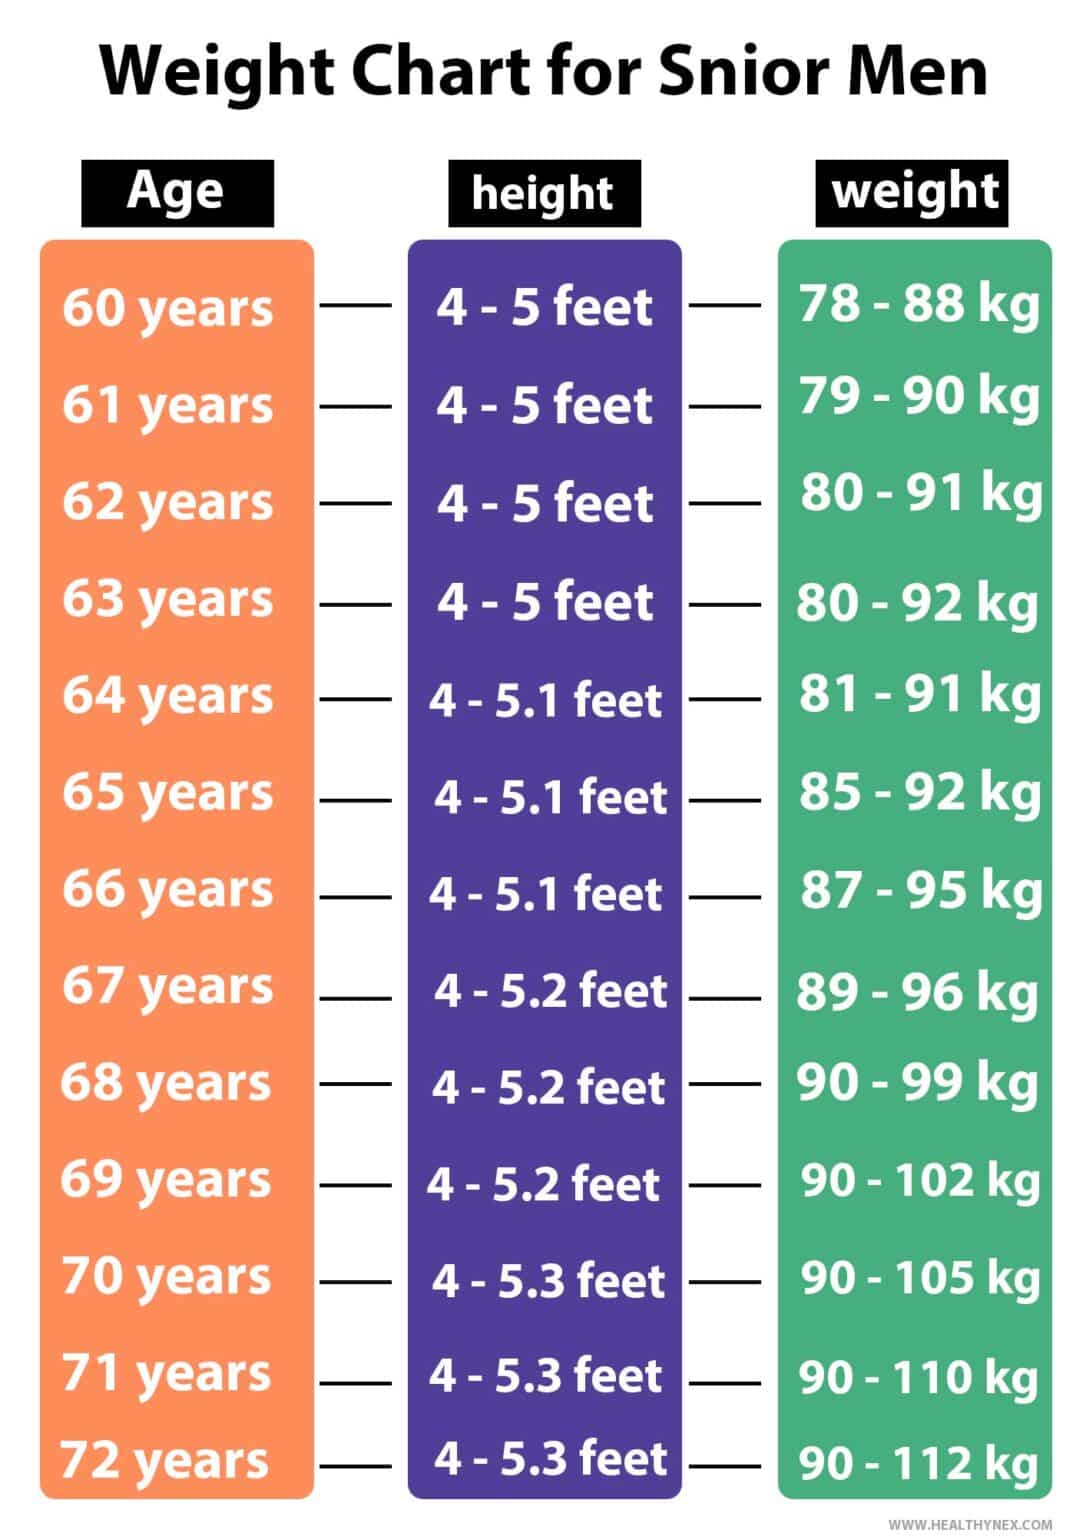 Height Wise Weight Chart For